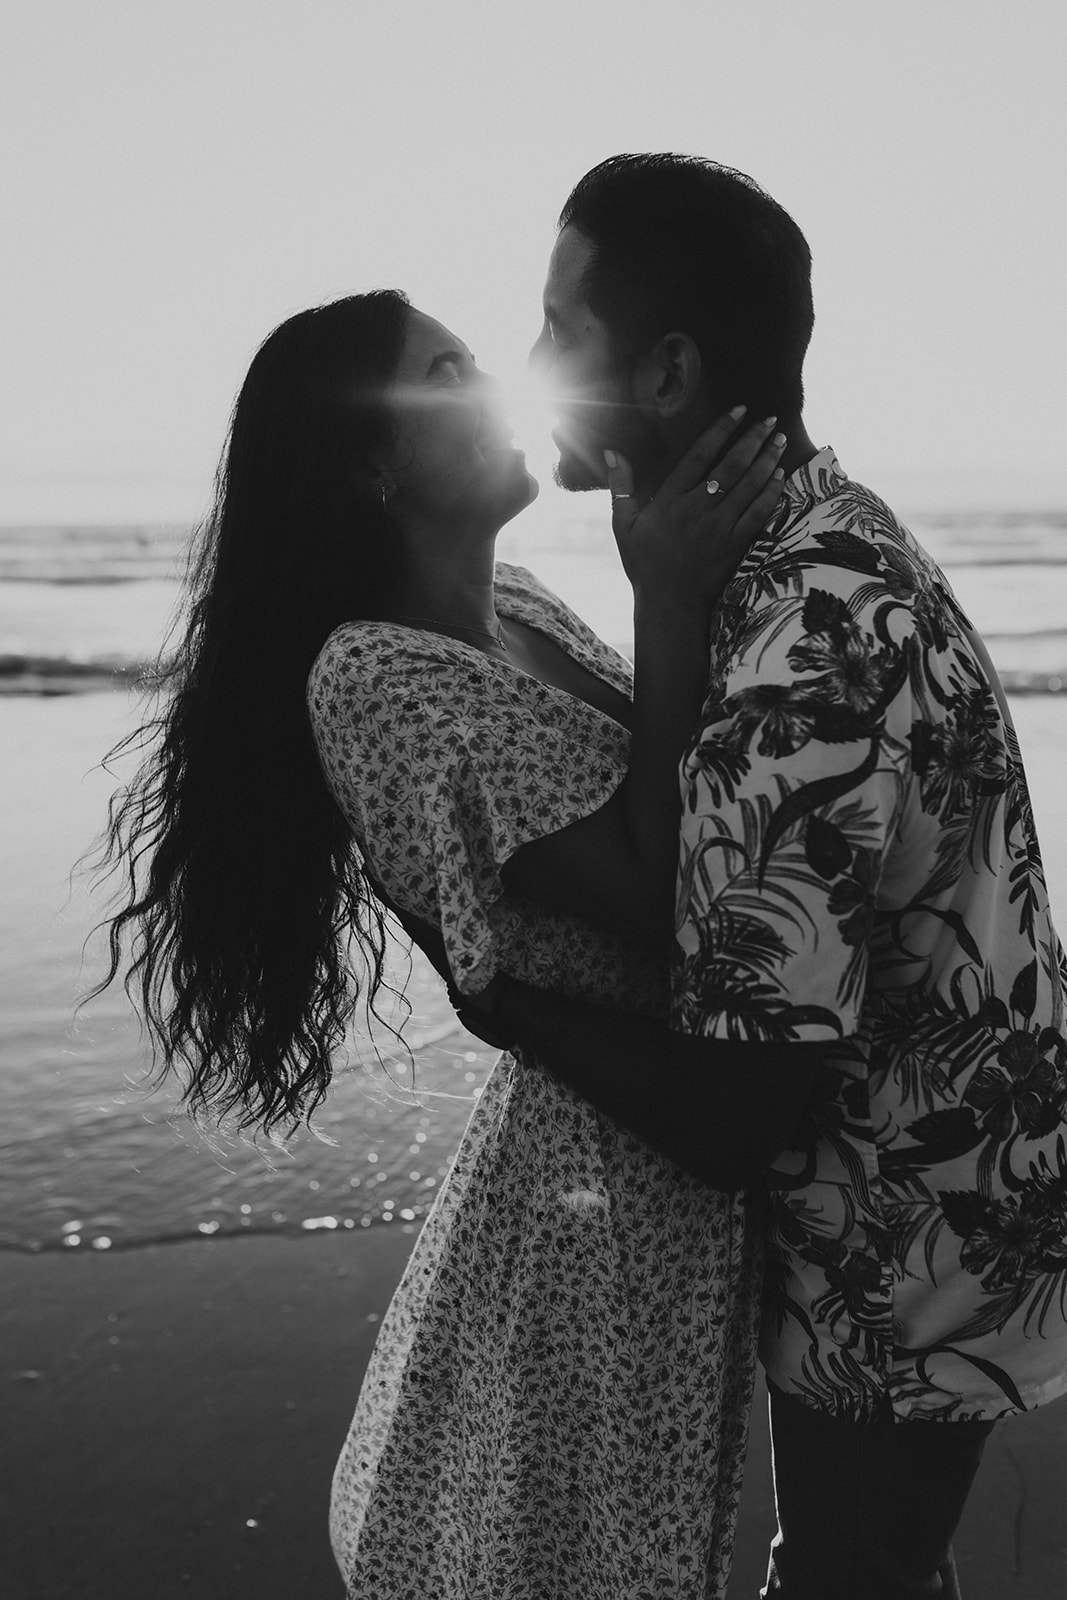 Playful Engagement Session At Scripps Beach in La Jolla, California